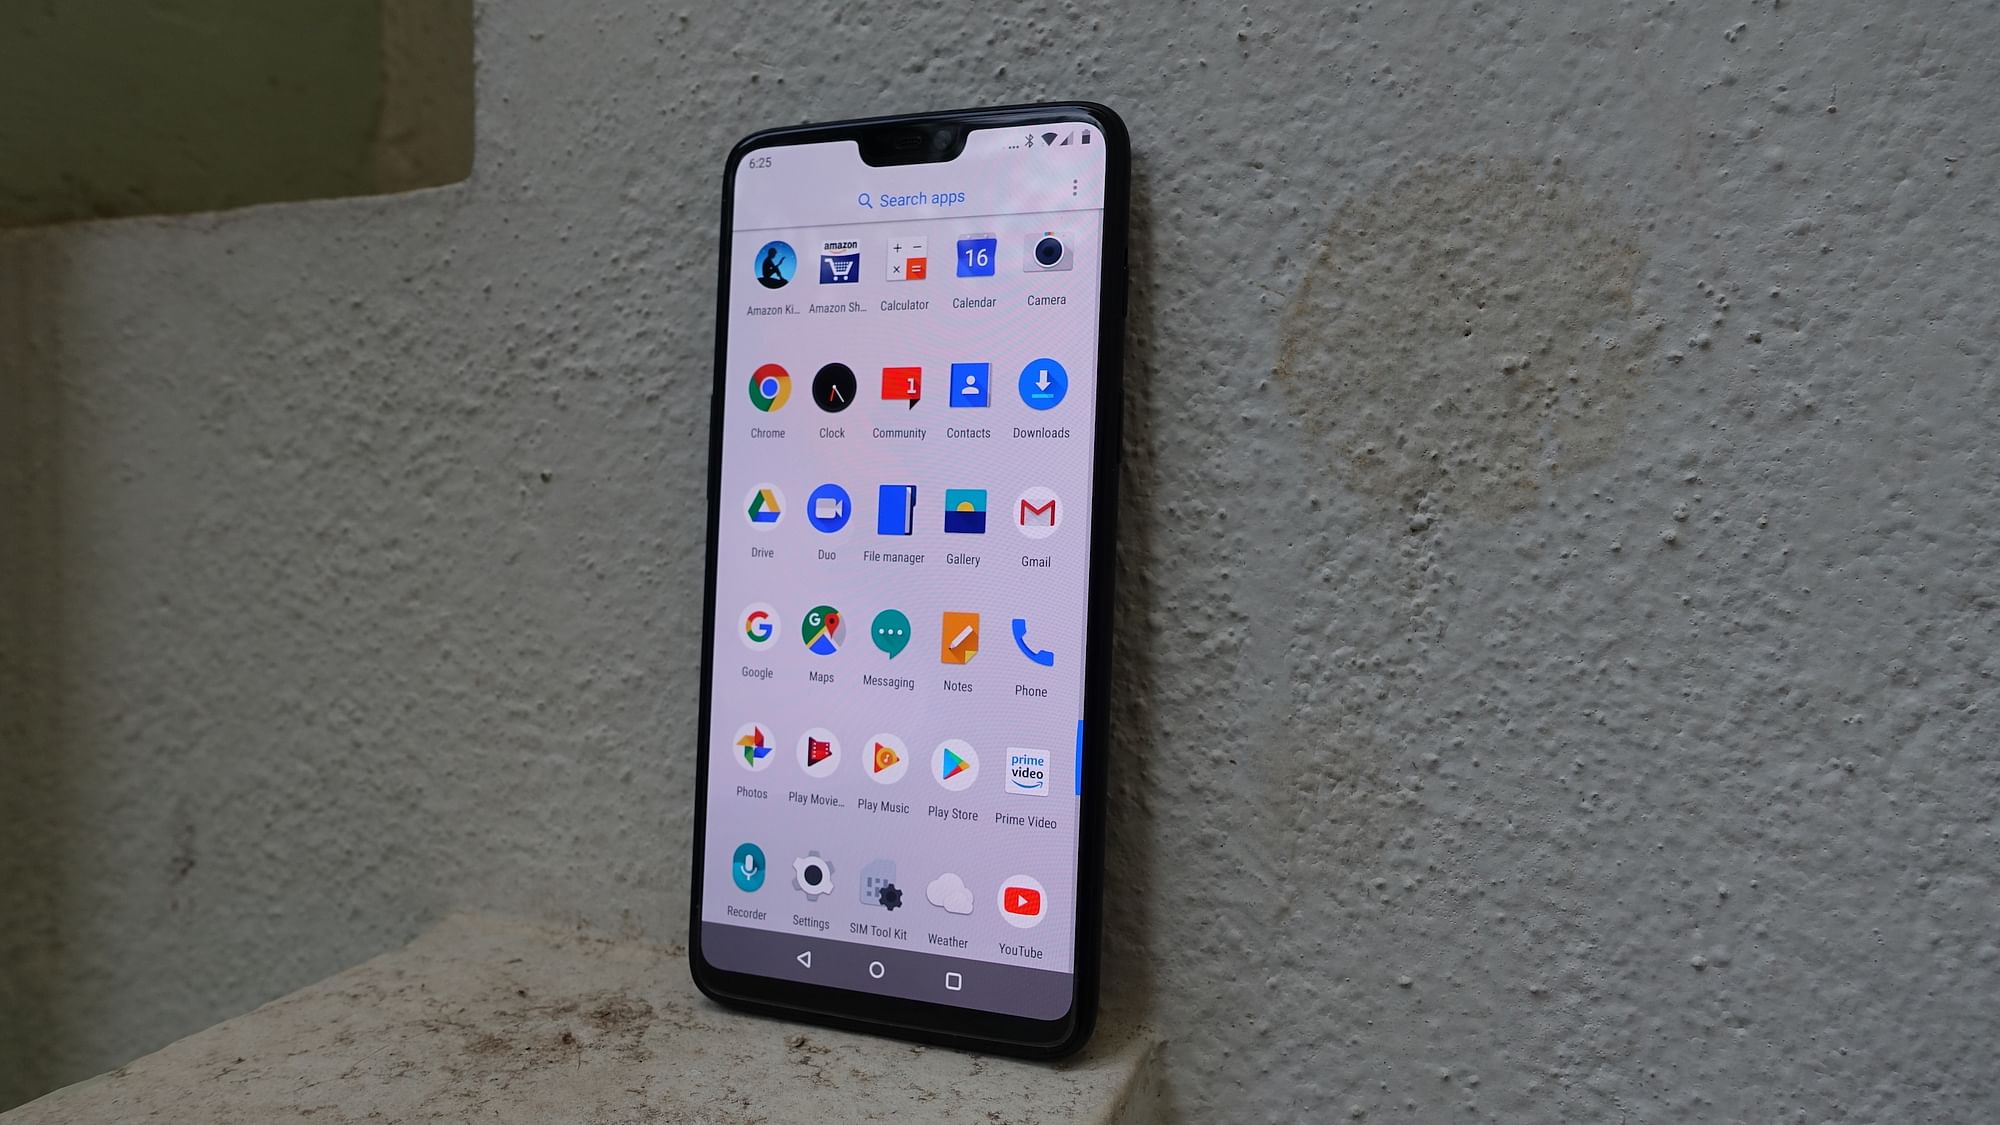 The OnePlus 6 comes with a FHD+ display